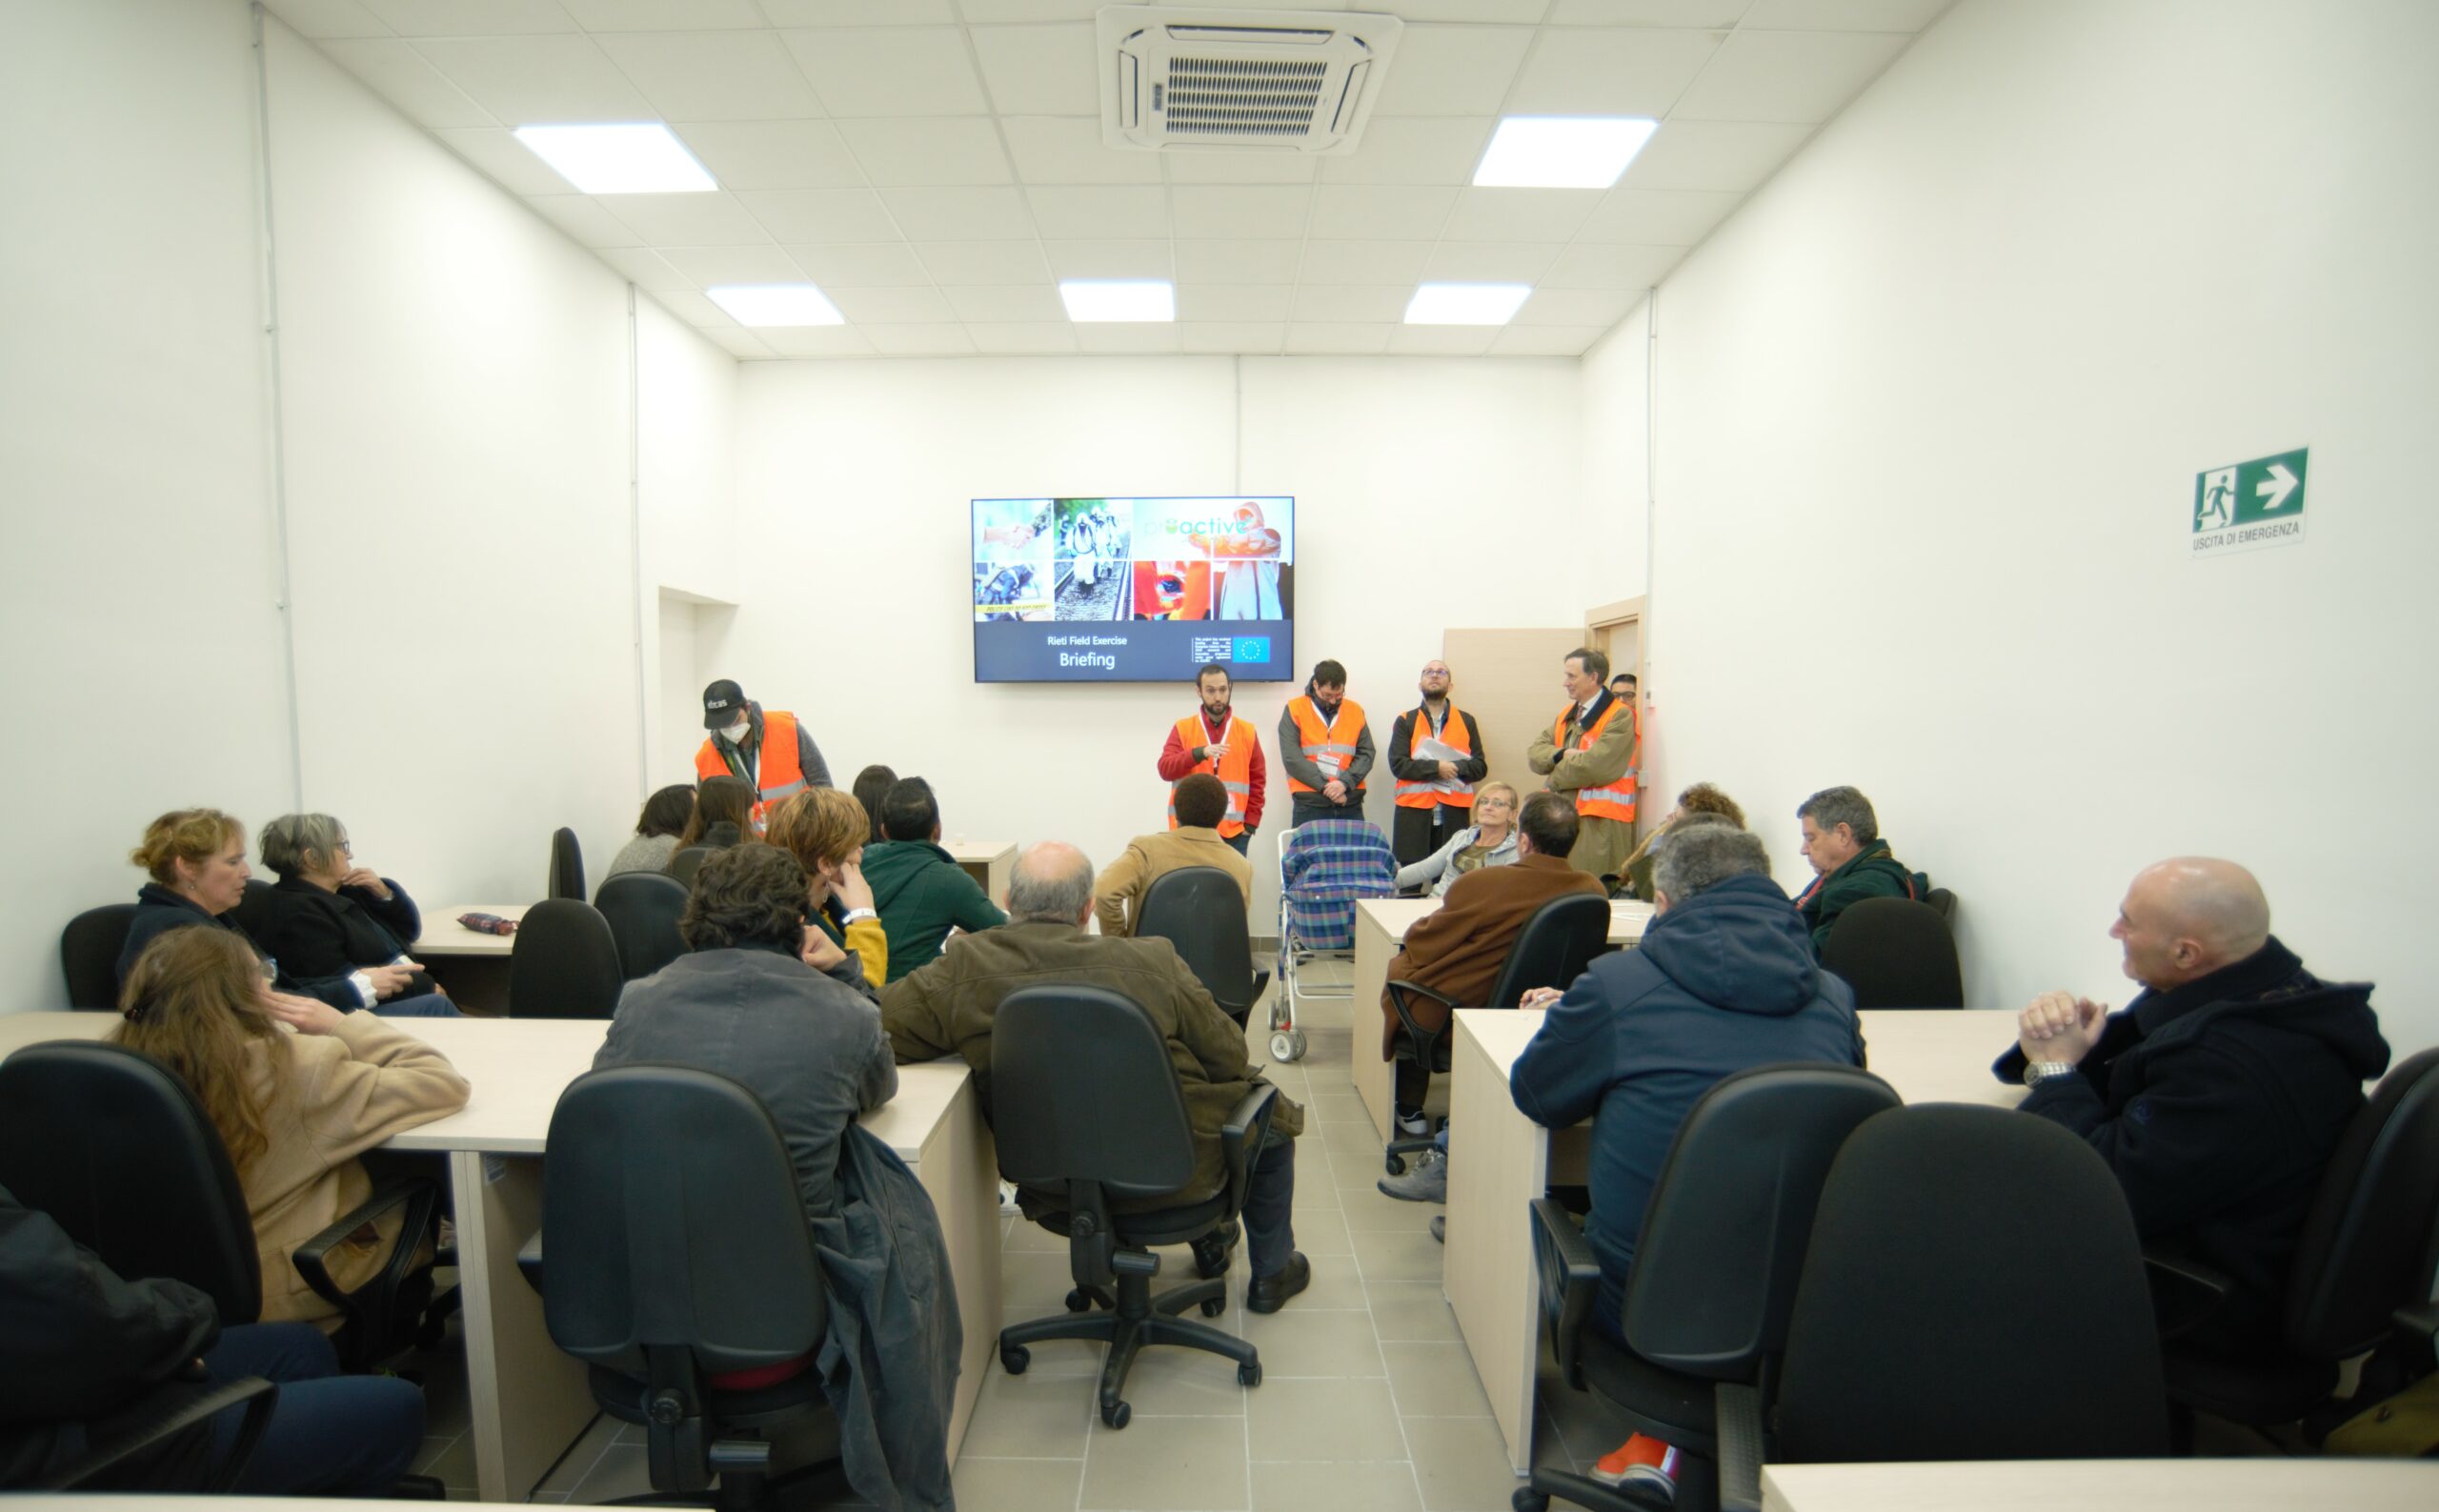 Around 17 people are sitting and listening to people who are wearing orange tabards who are standing in front of participants and one person is explaining something. They are in a classroom. A TV with a non-legible slide is displayed.